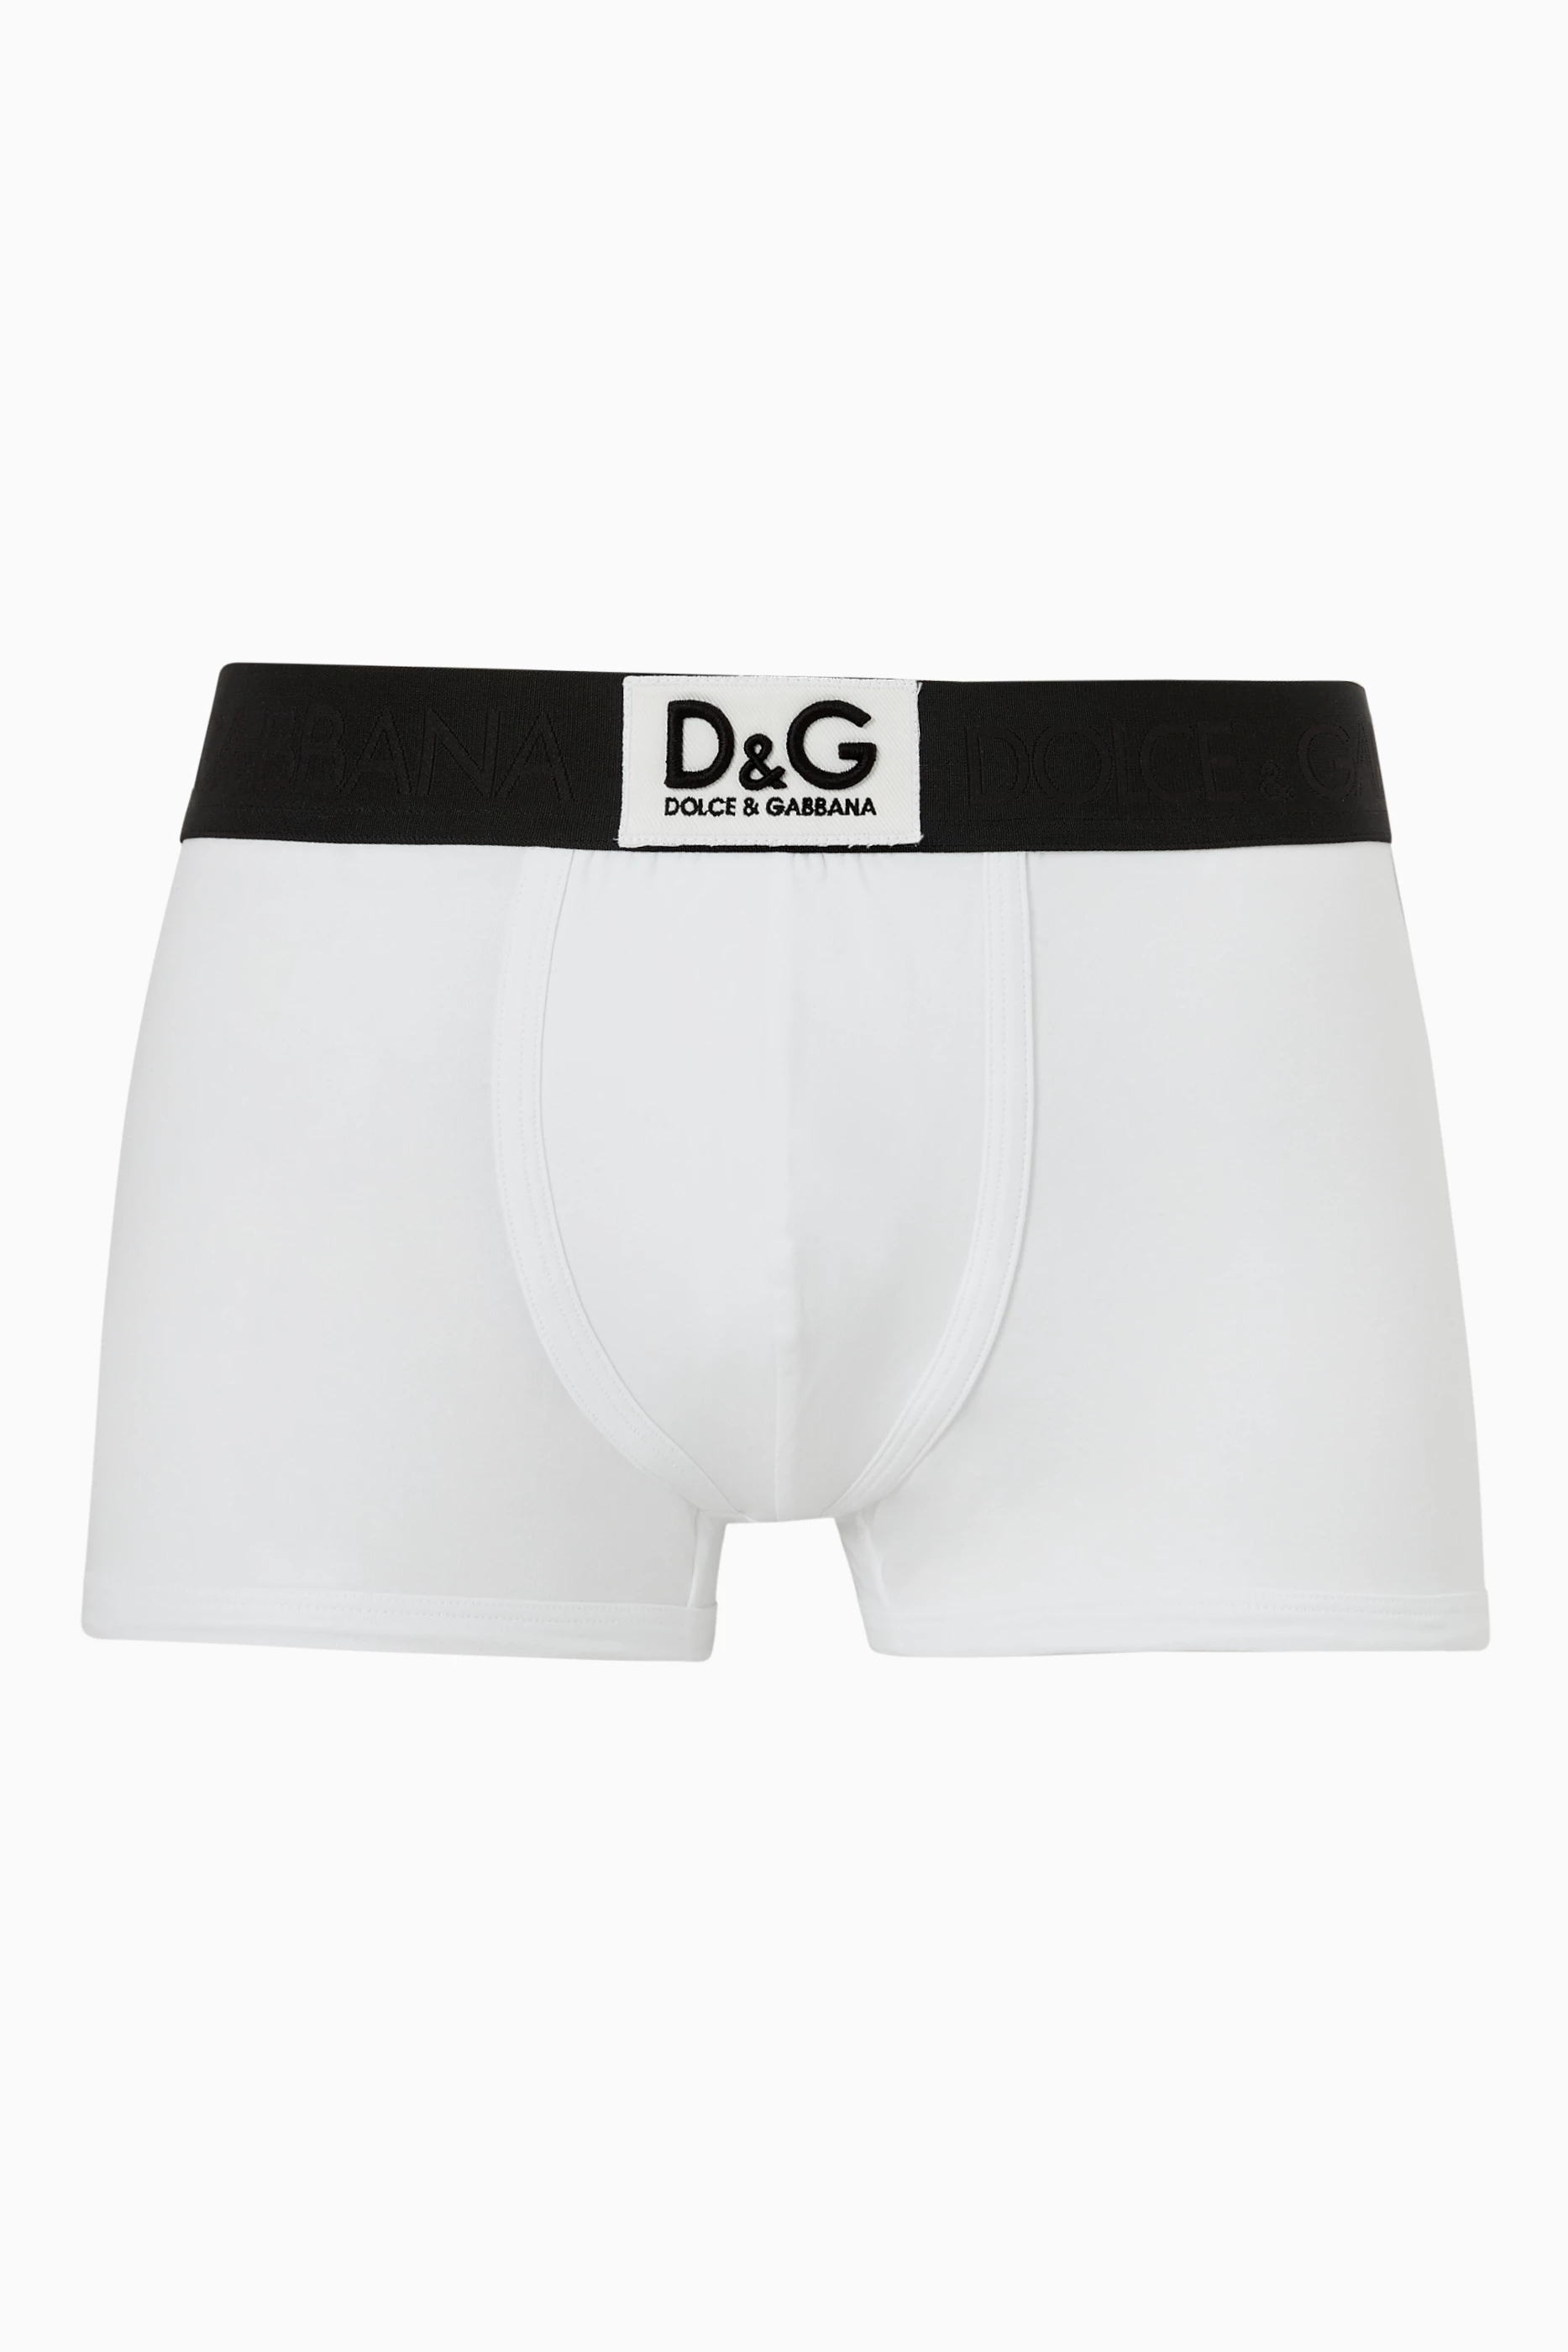 Buy Dolce & Gabbana White Boxers with D&G Patch in Two-way Stretch